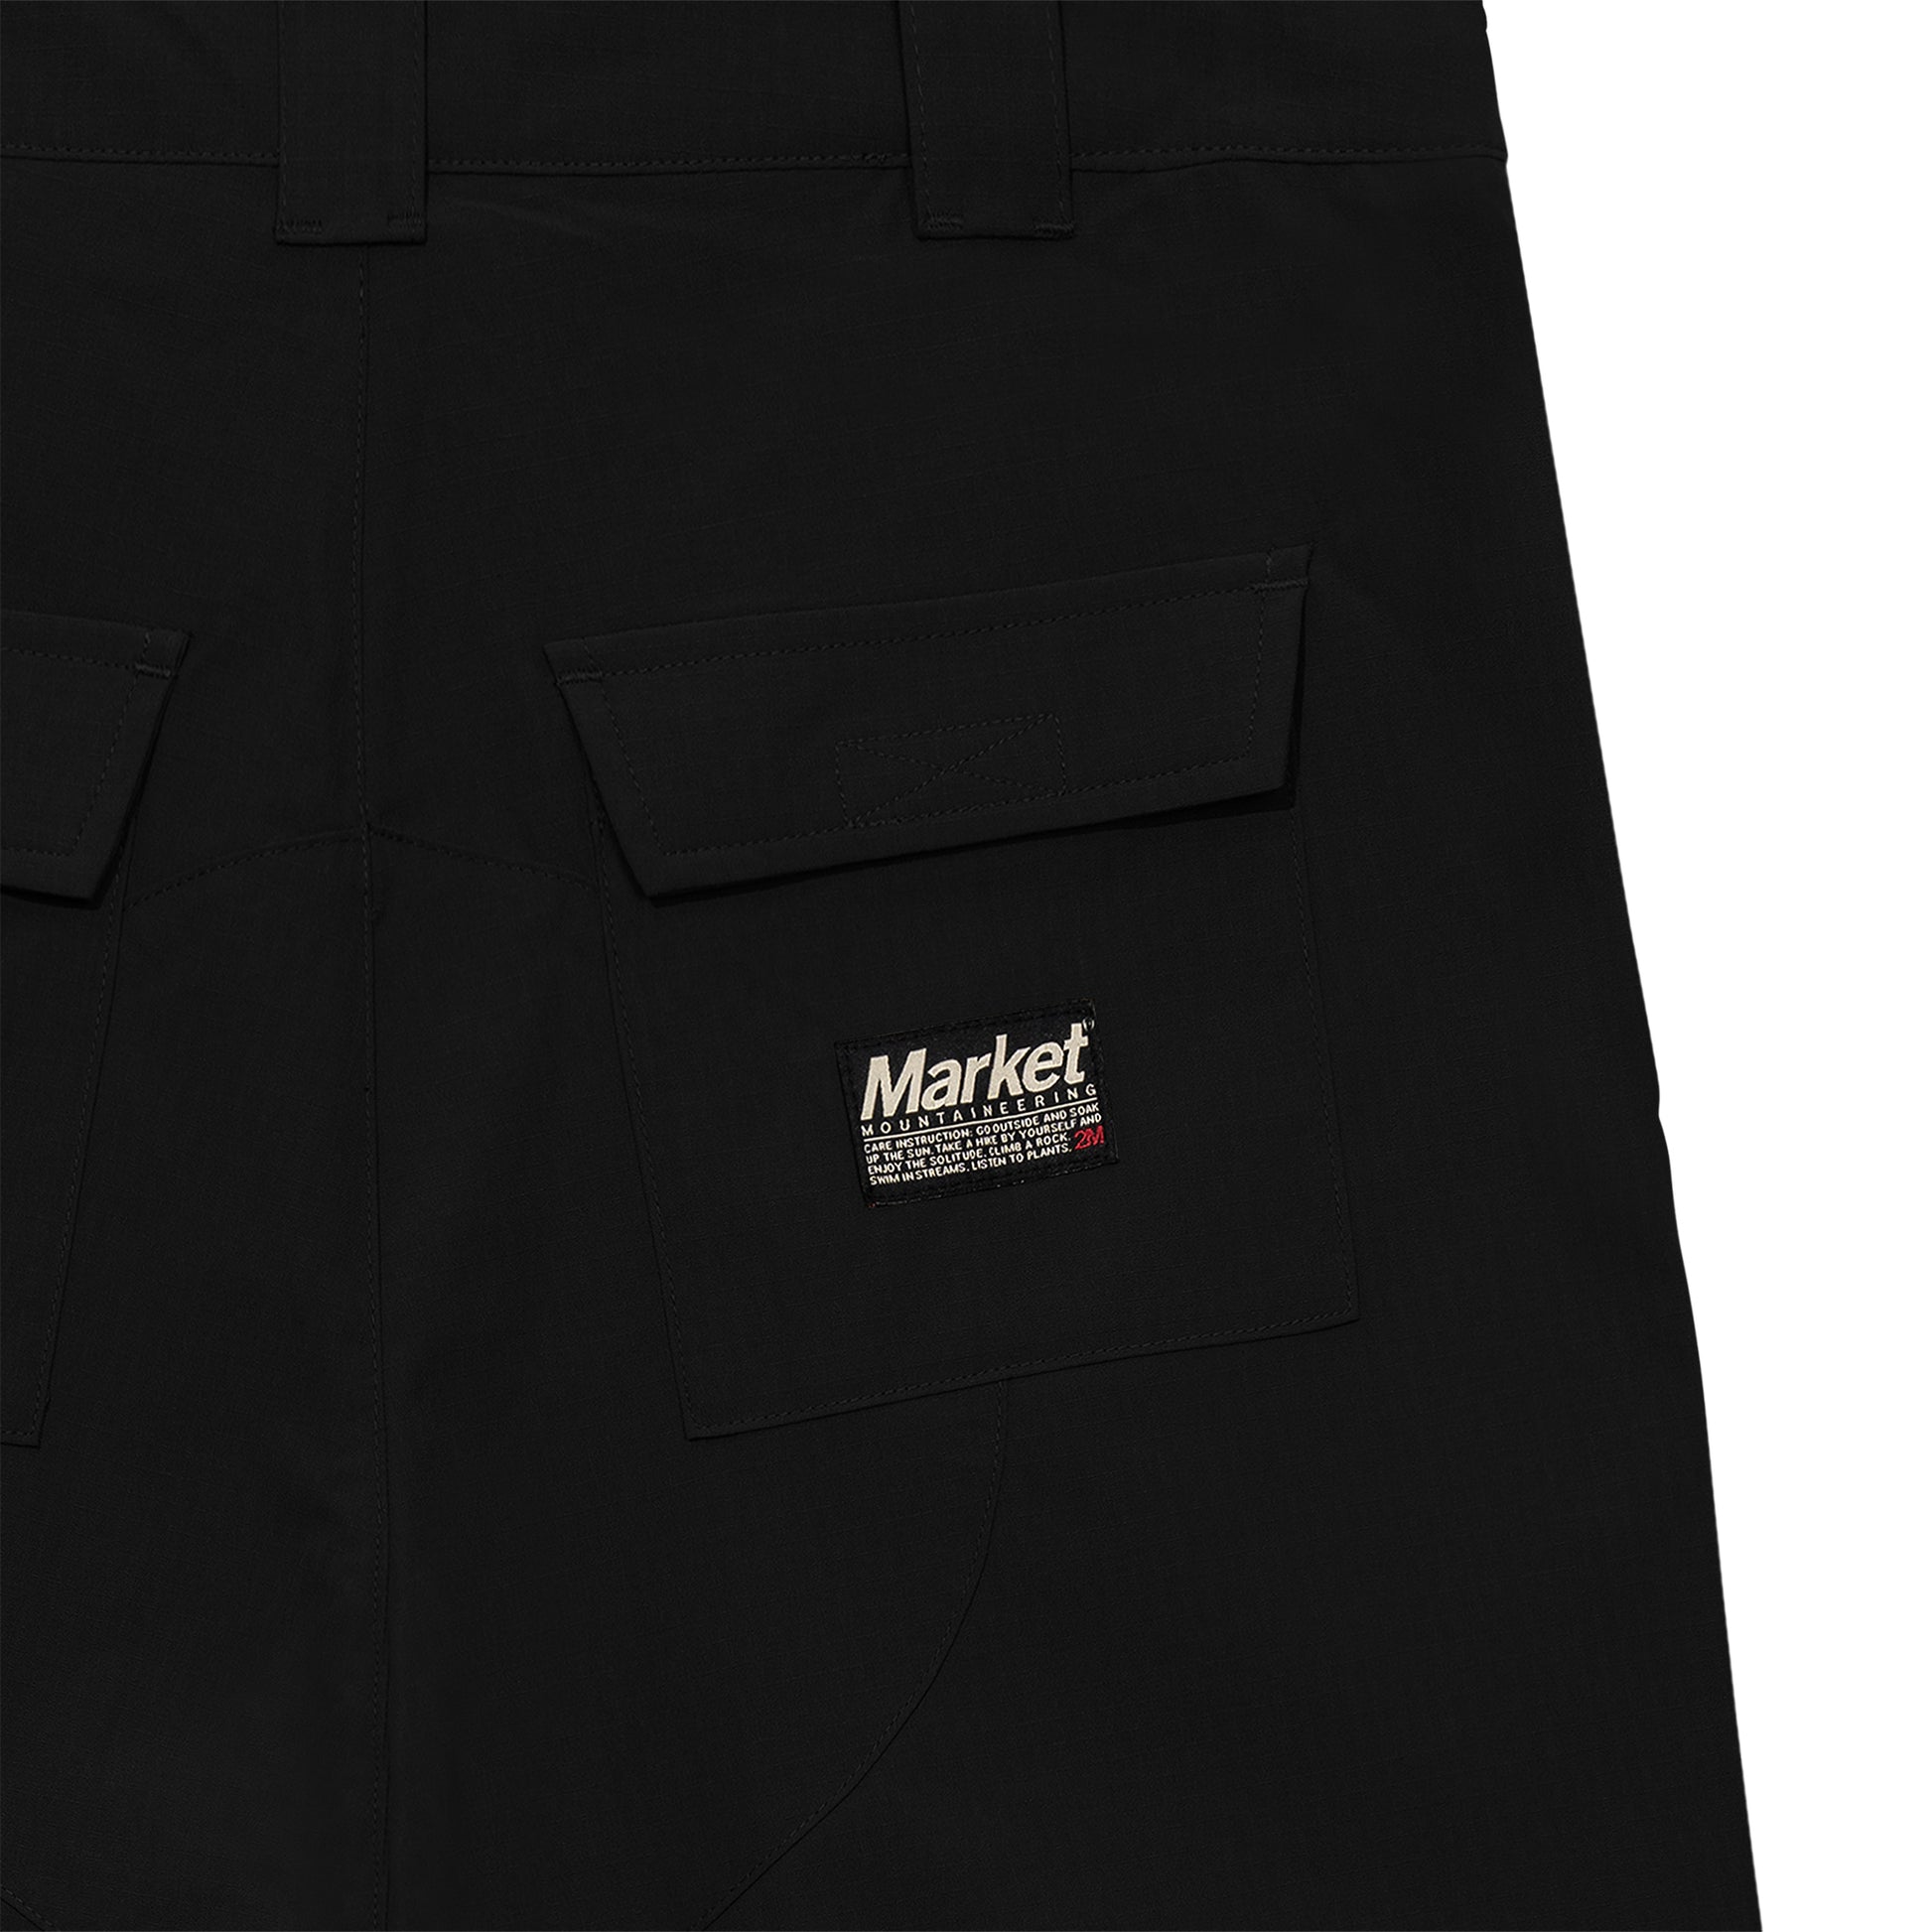 MARKET clothing brand MORAINE PANTS. Find more graphic tees, sweatpants, shorts and more bottoms at MarketStudios.com. Formally Chinatown Market. 